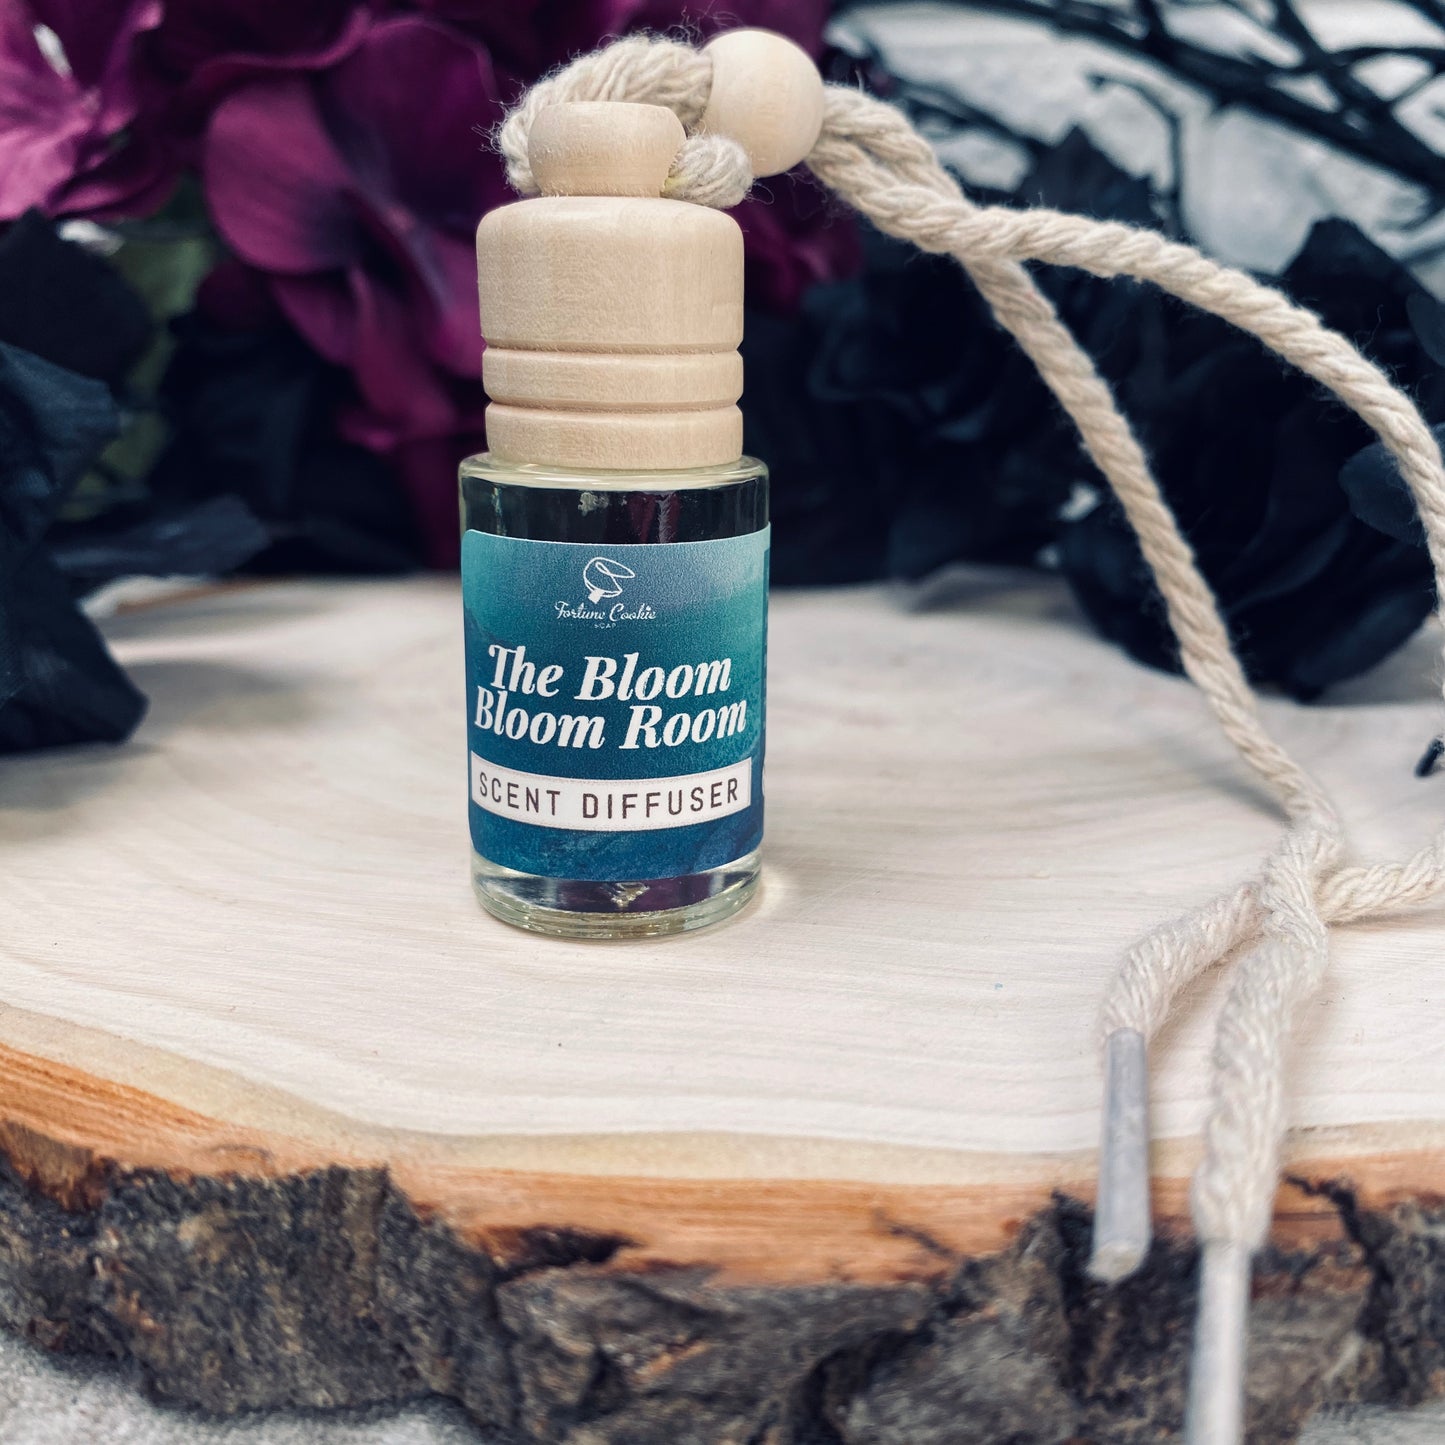 THE BLOOM BLOOM ROOM Scent Diffuser